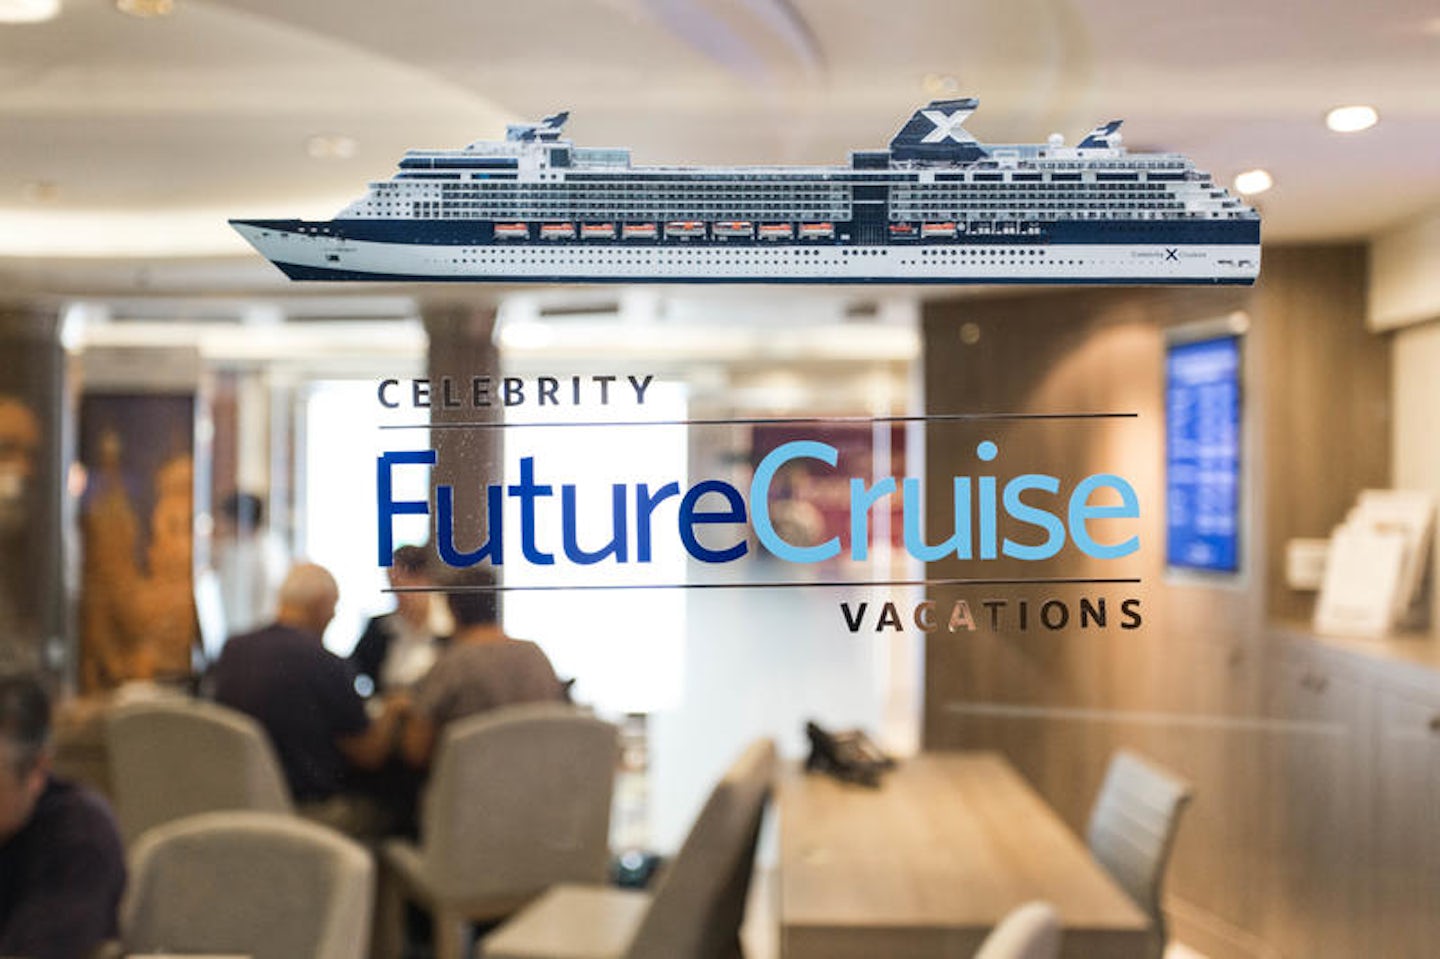 Future Cruise Vacations on Celebrity Infinity